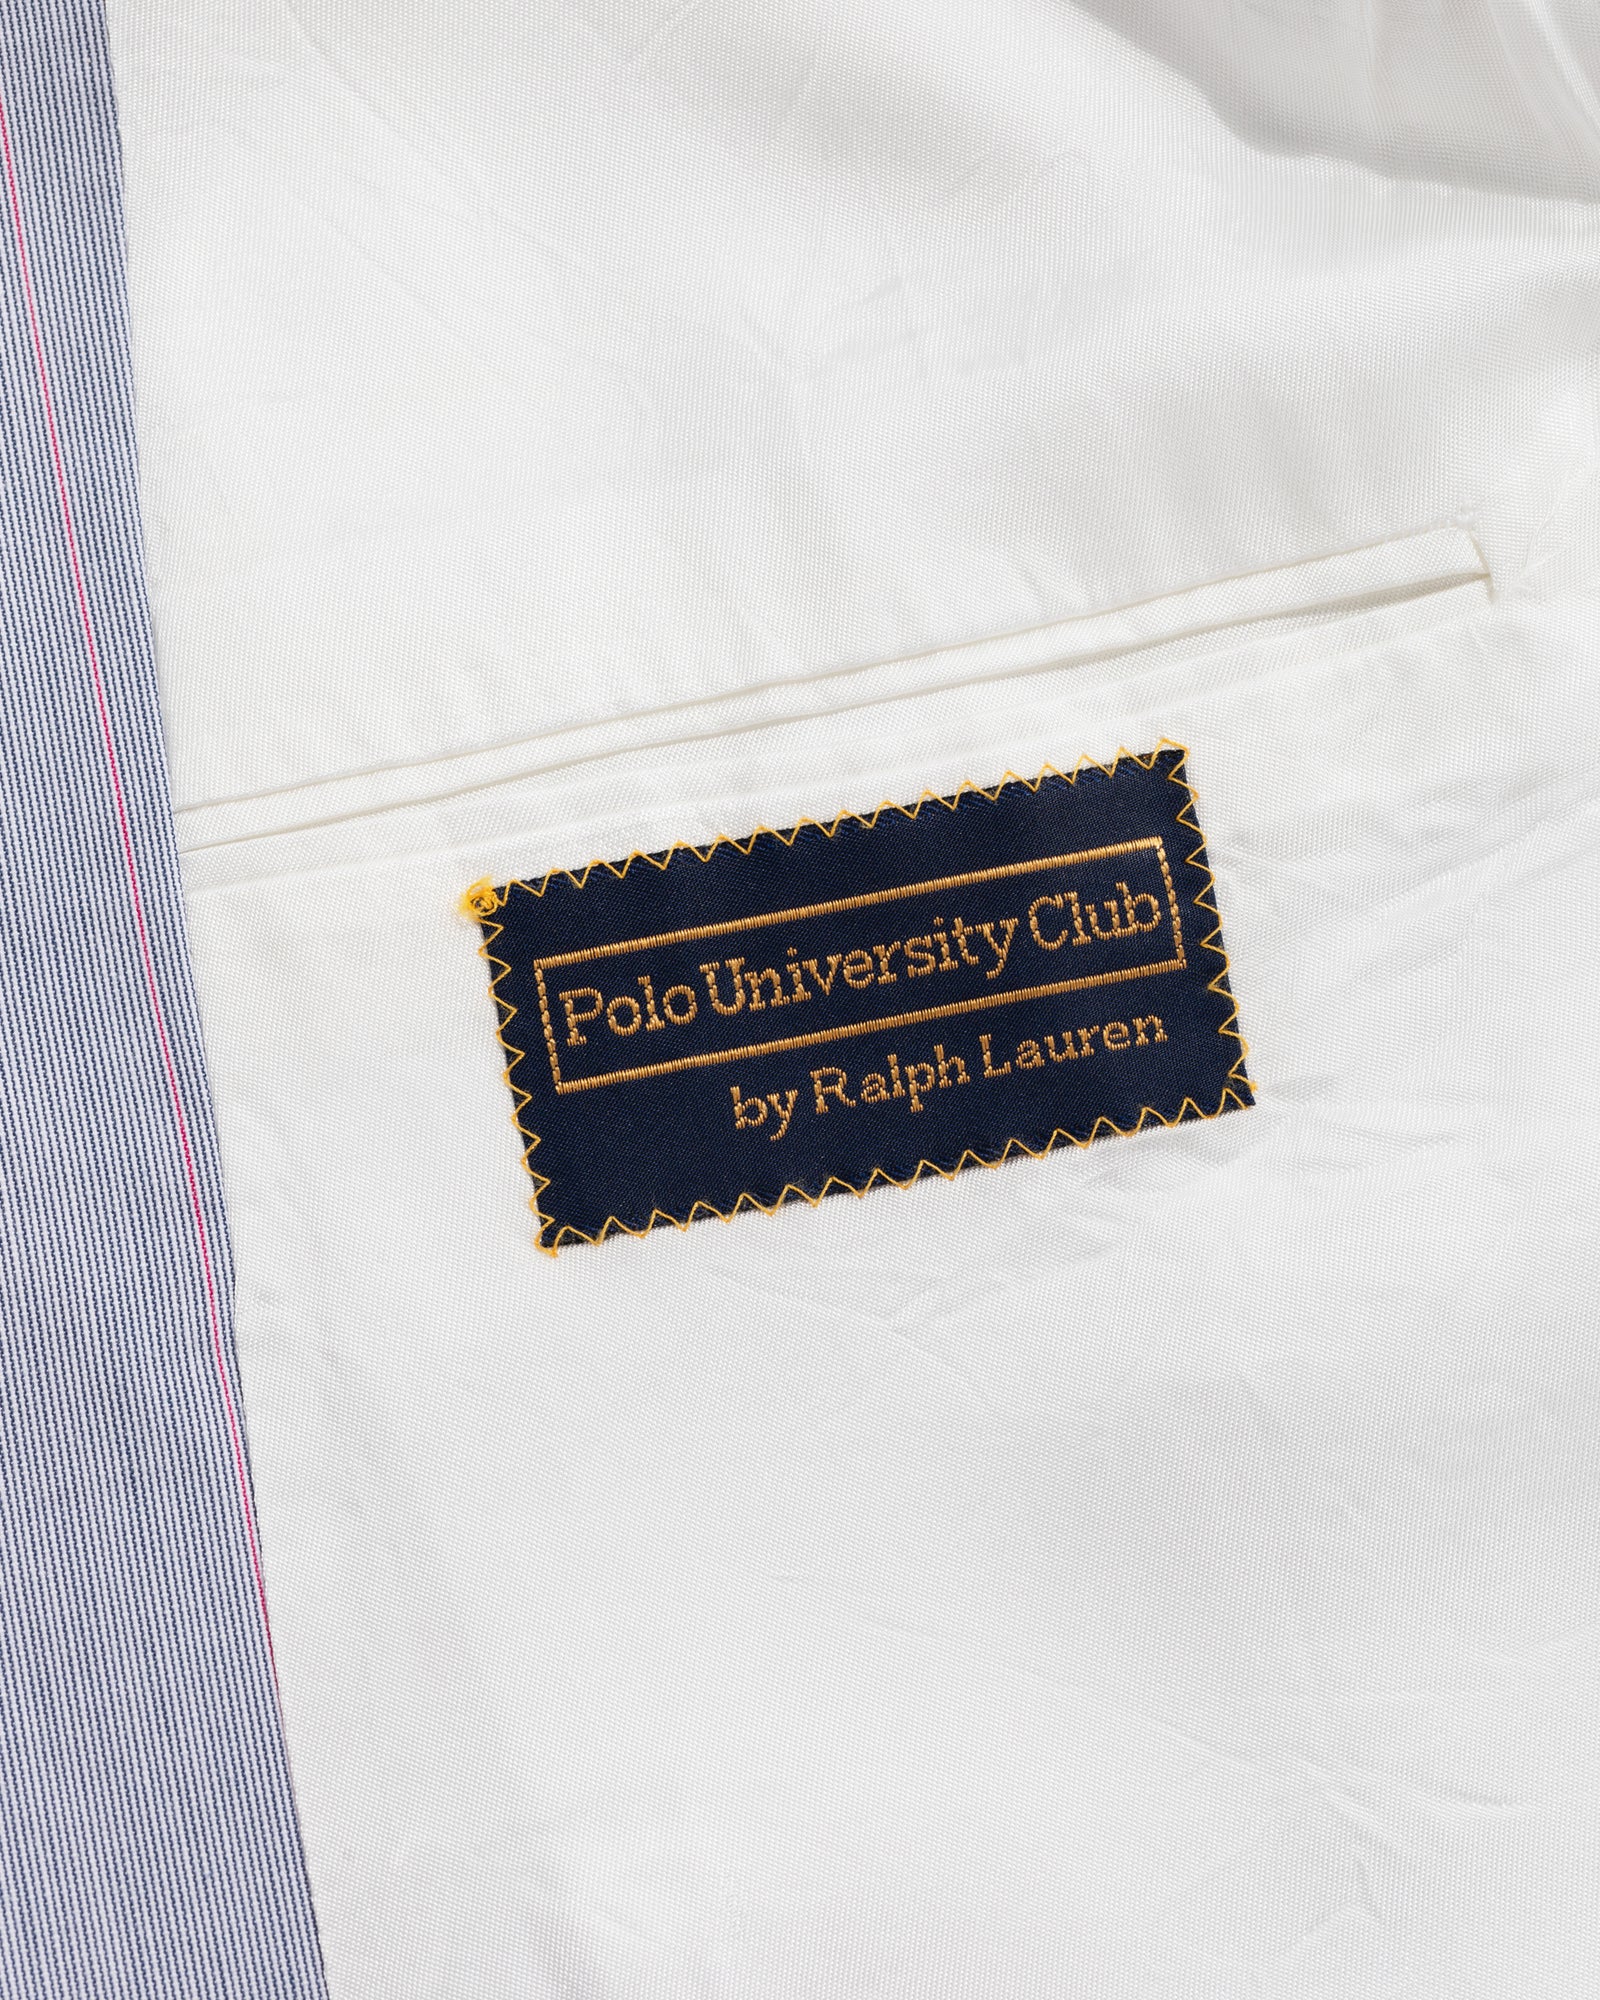 Vintage Polo University Club by Ralph Lauren Double Breasted Suit